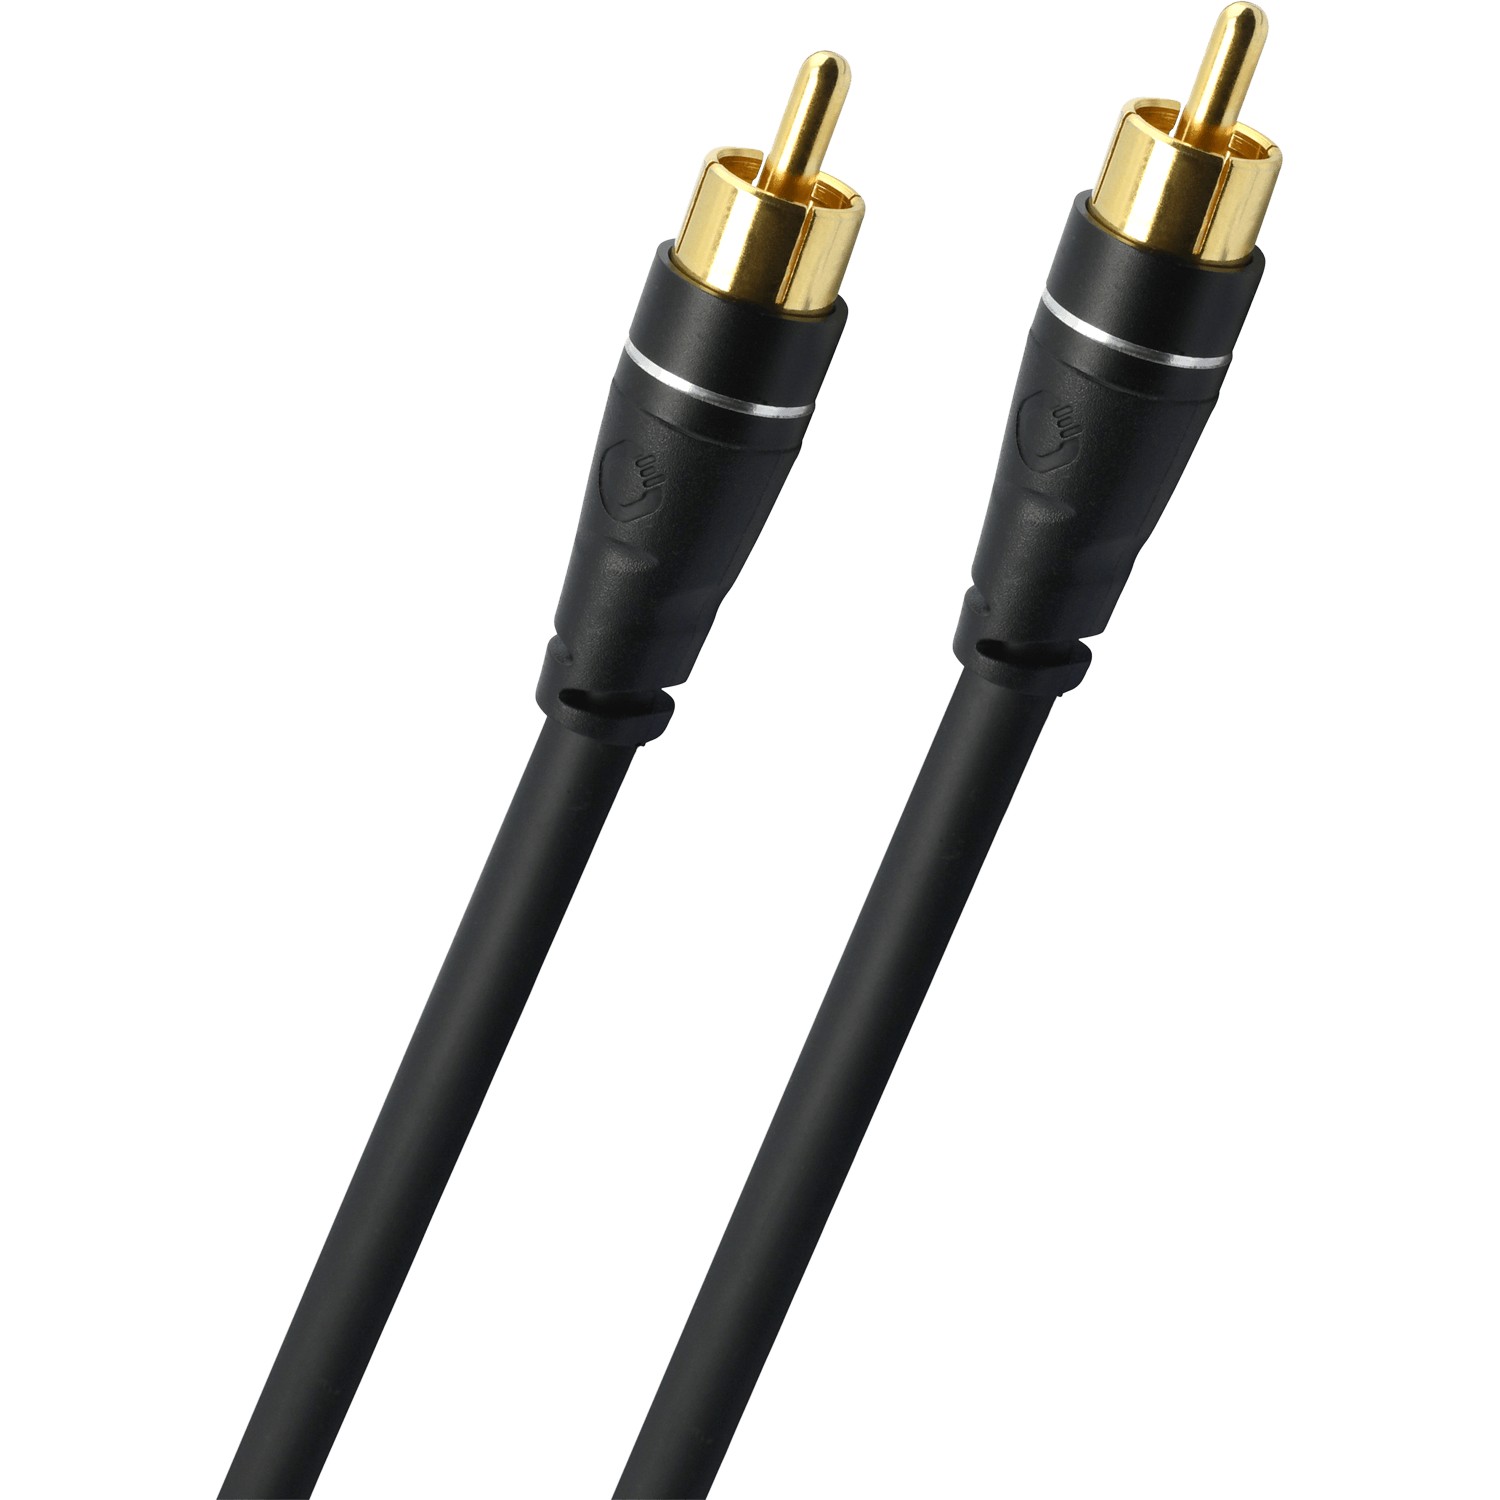 Кабели межблочные аудио Oehlbach EXCELLENCE Sub Link Subwoofer cable 5,0m bw, D1C33162 hdmi кабели oehlbach select video link cable 3 0m 33103